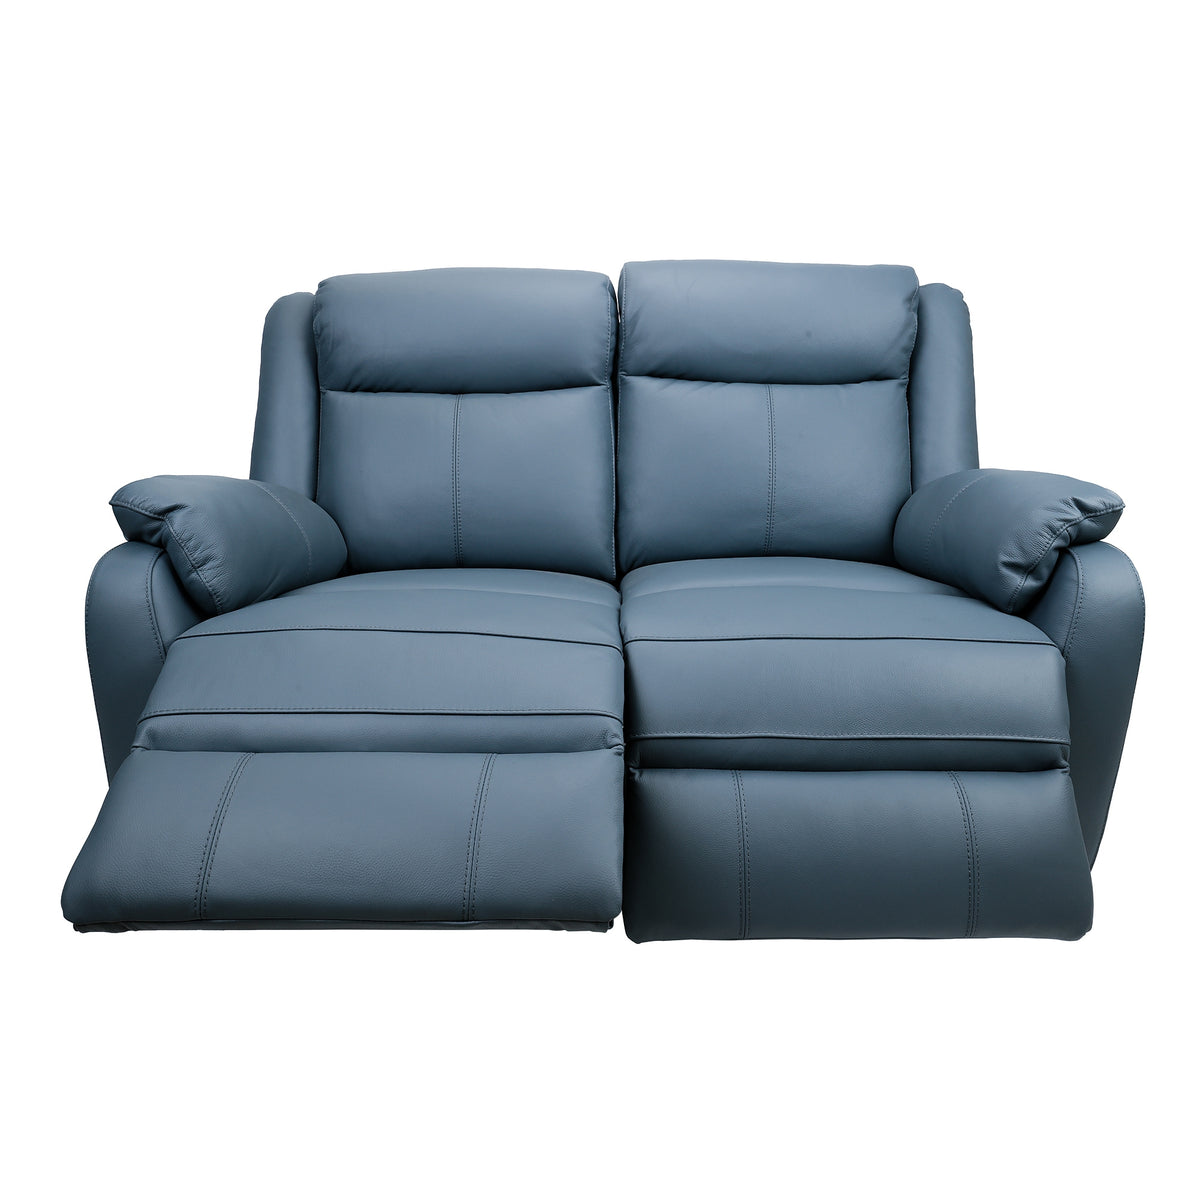 Bella 2 Seater Leather Electric Recliner Sofa Lounge Blue 